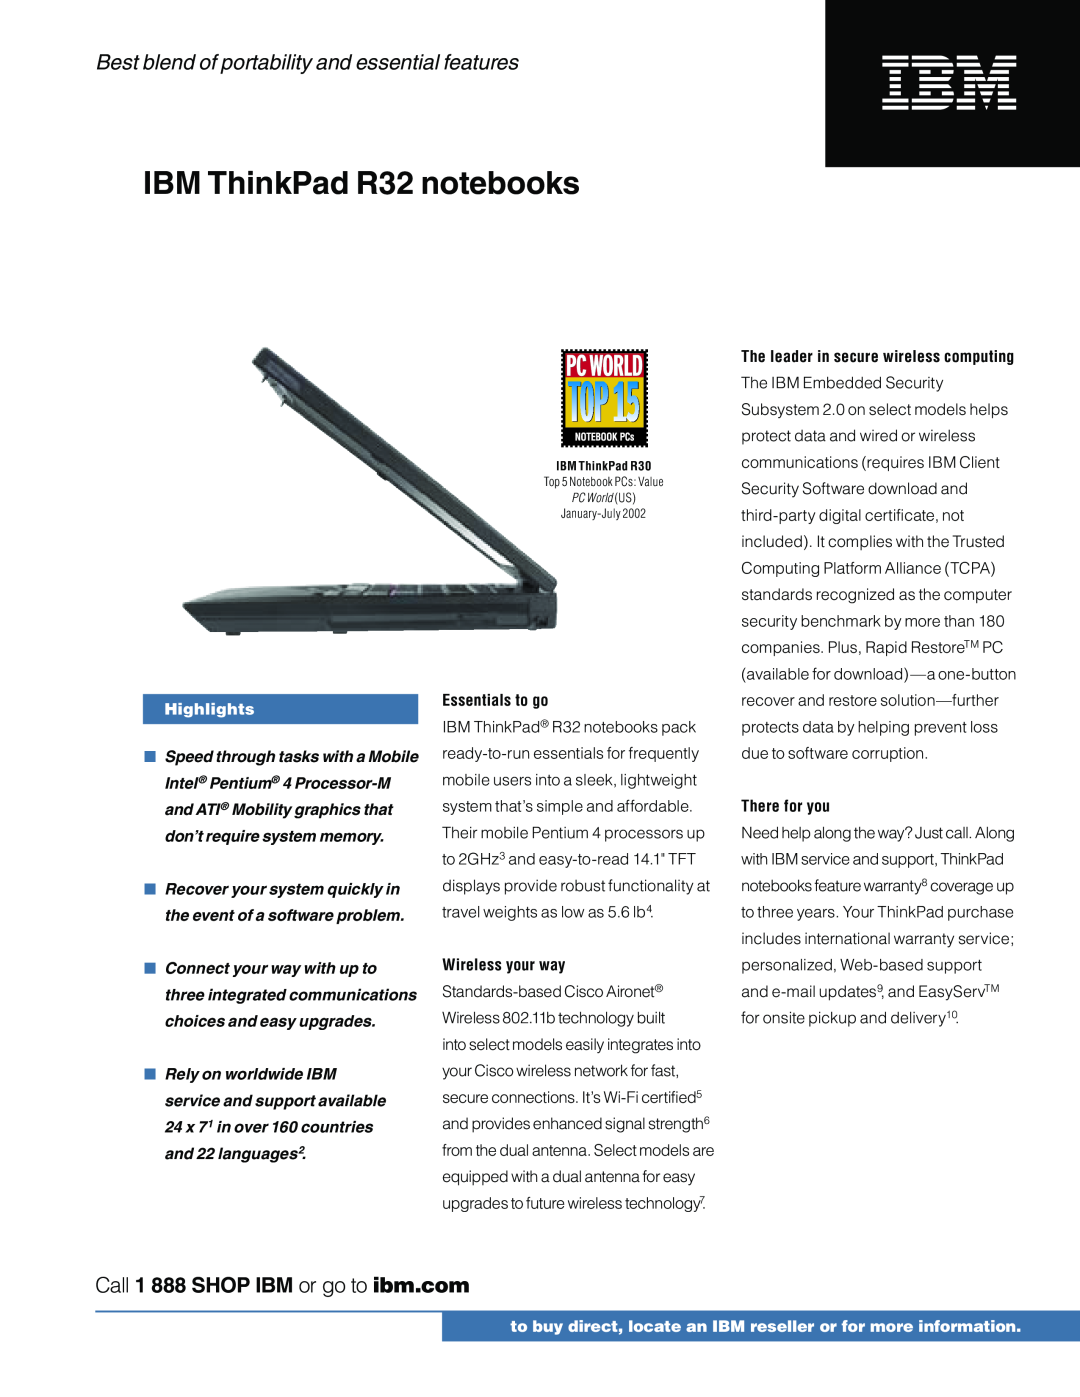 IBM R32 warranty The leader in secure wireless computing, Highlights, Essentials to go, Wireless your way, There for you 